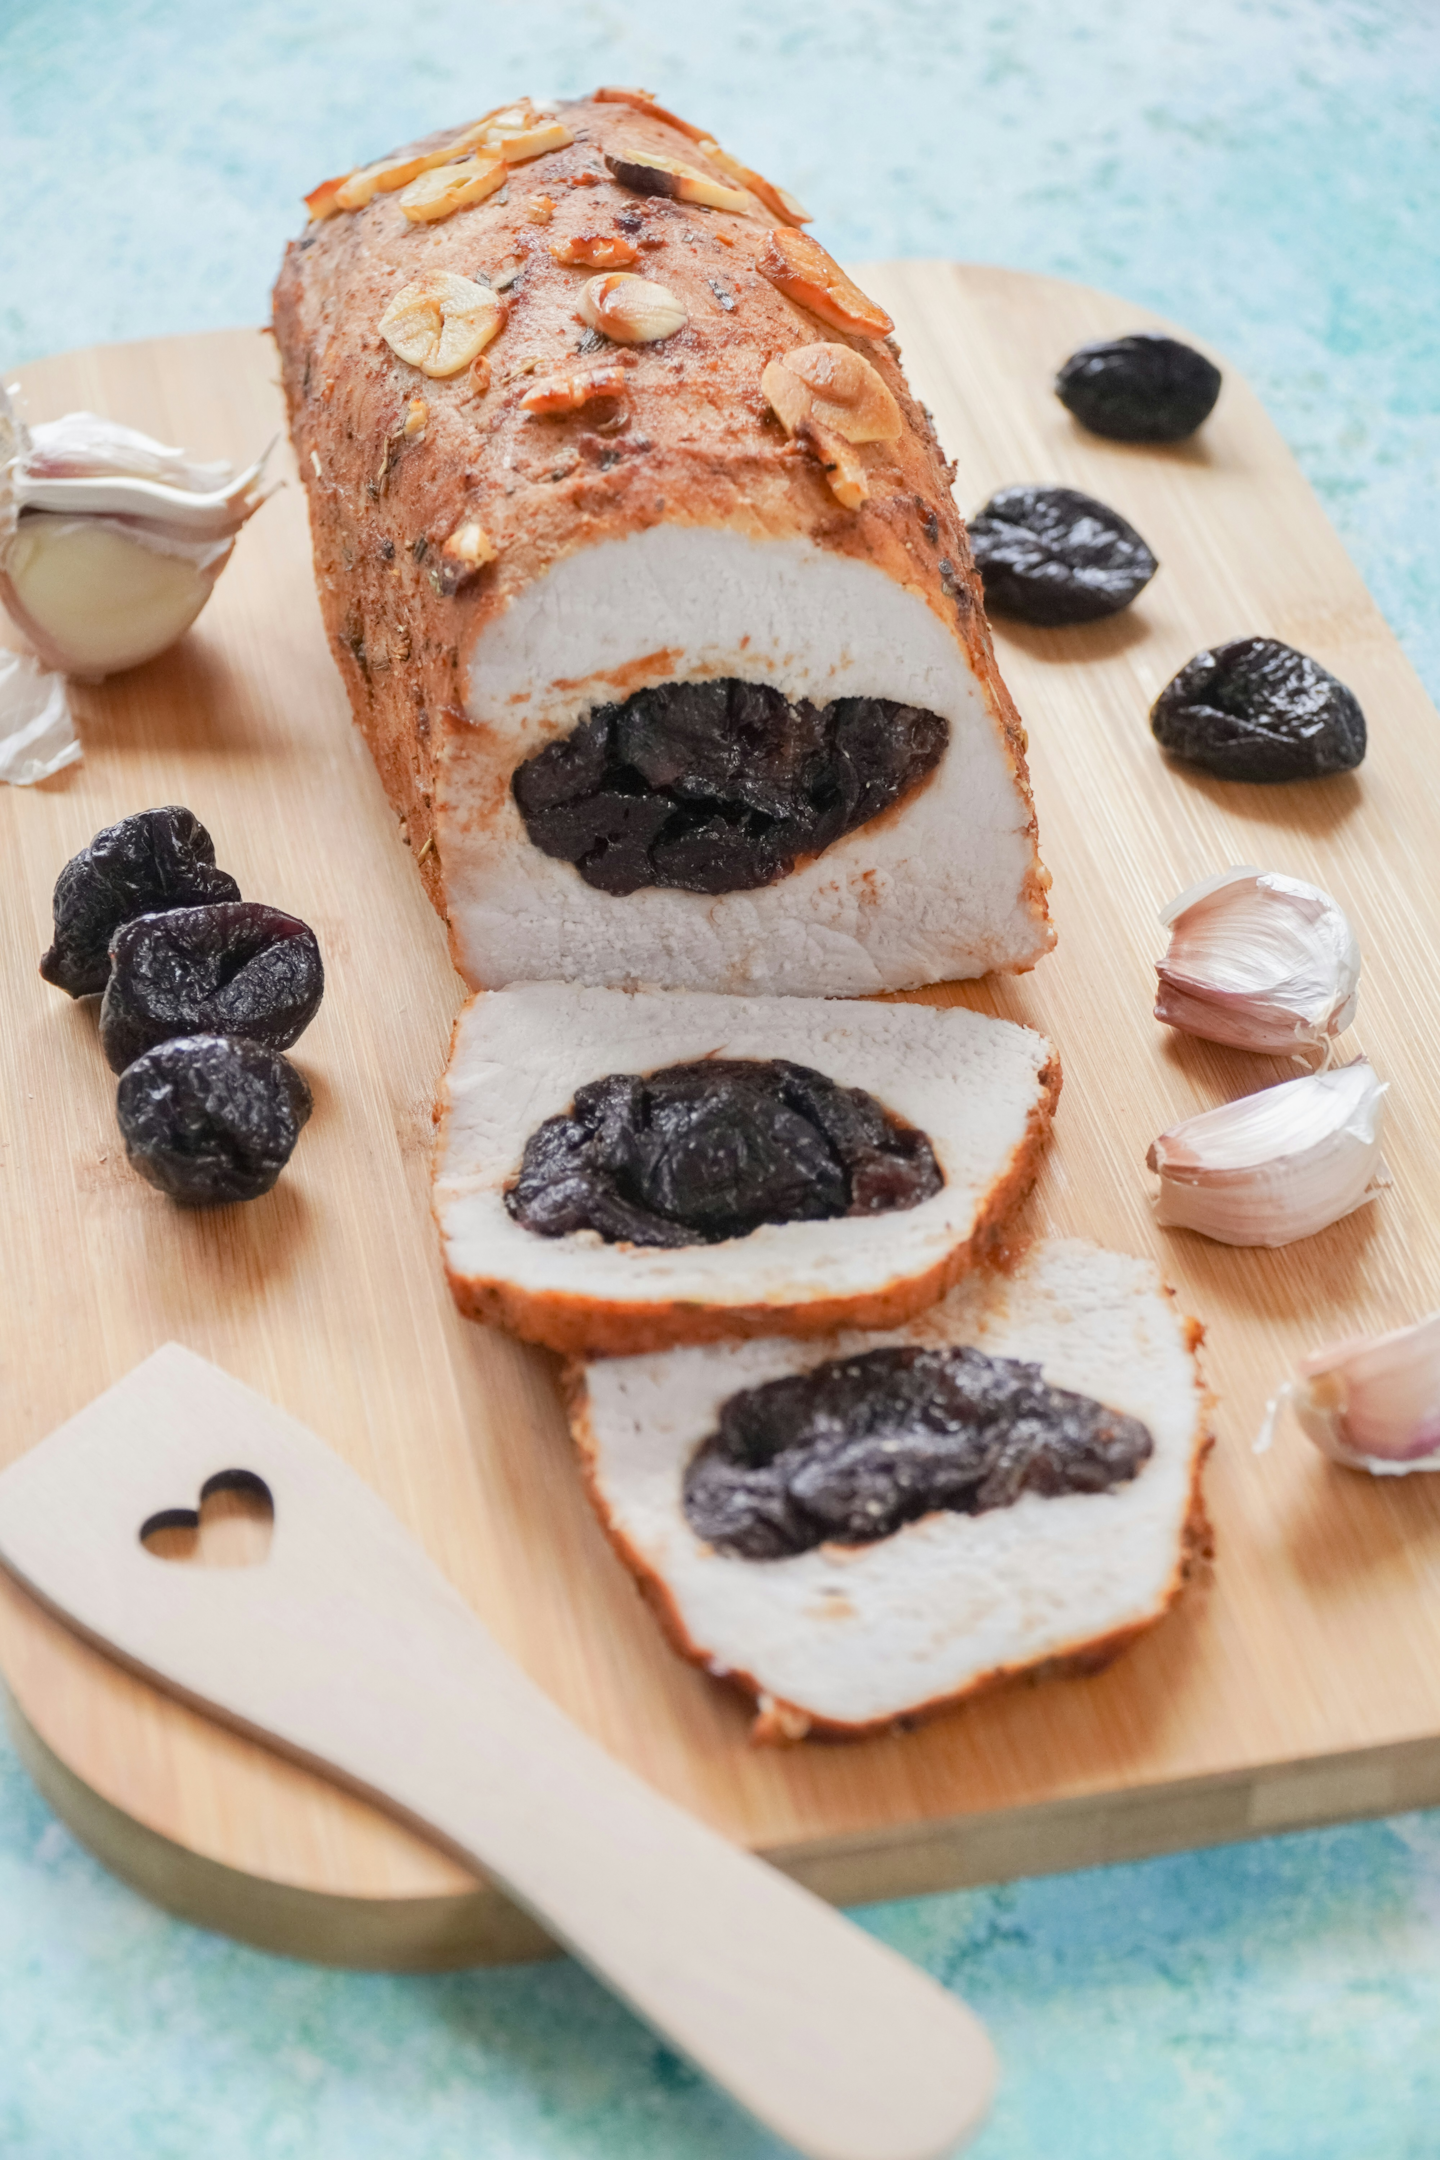 Boneless pork loin stuffed with prunes is a true showstopper and a great alternative to a traditional pork roast recipe.